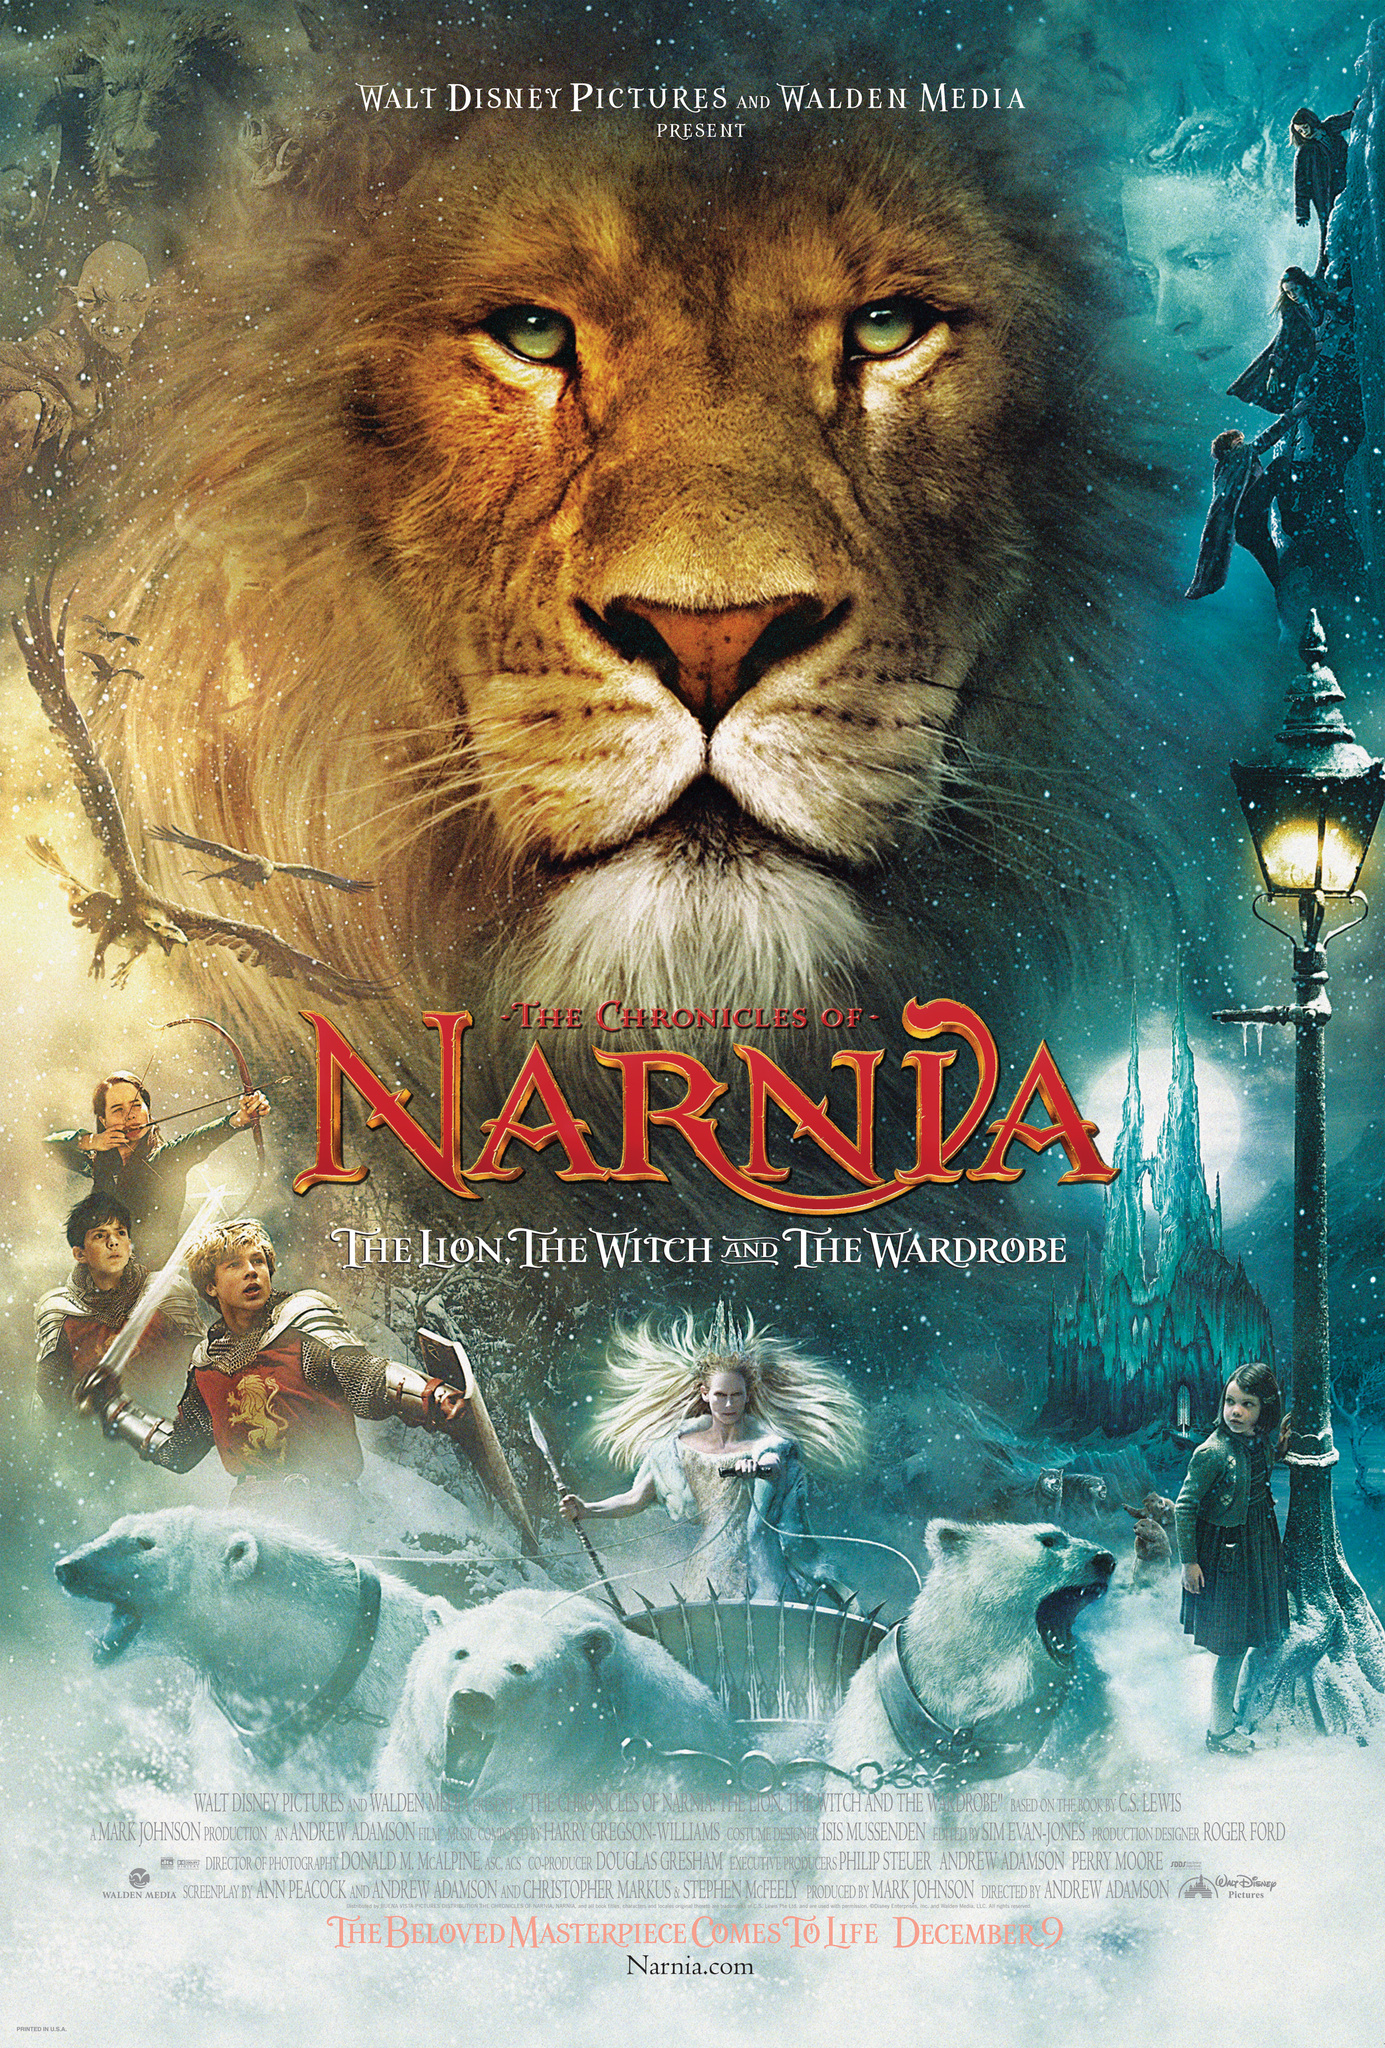 The Chronicles of Narnia